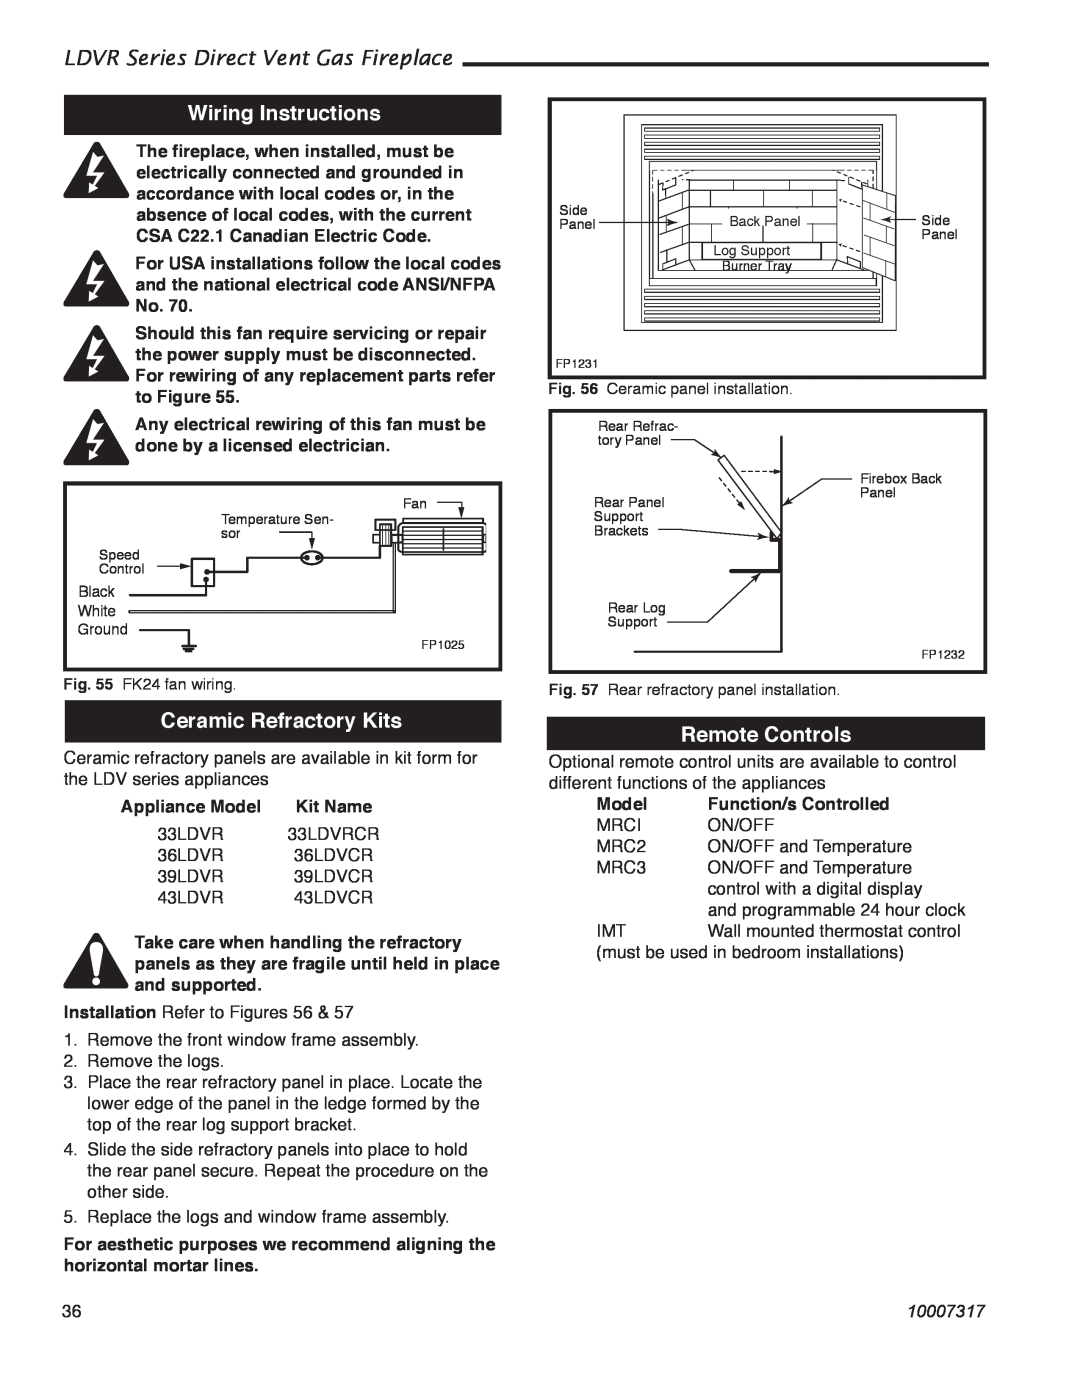 Majestic Appliances 33LDVR Wiring Instructions, Ceramic Refractory Kits, Remote Controls, to Figure, Model, 10007317 